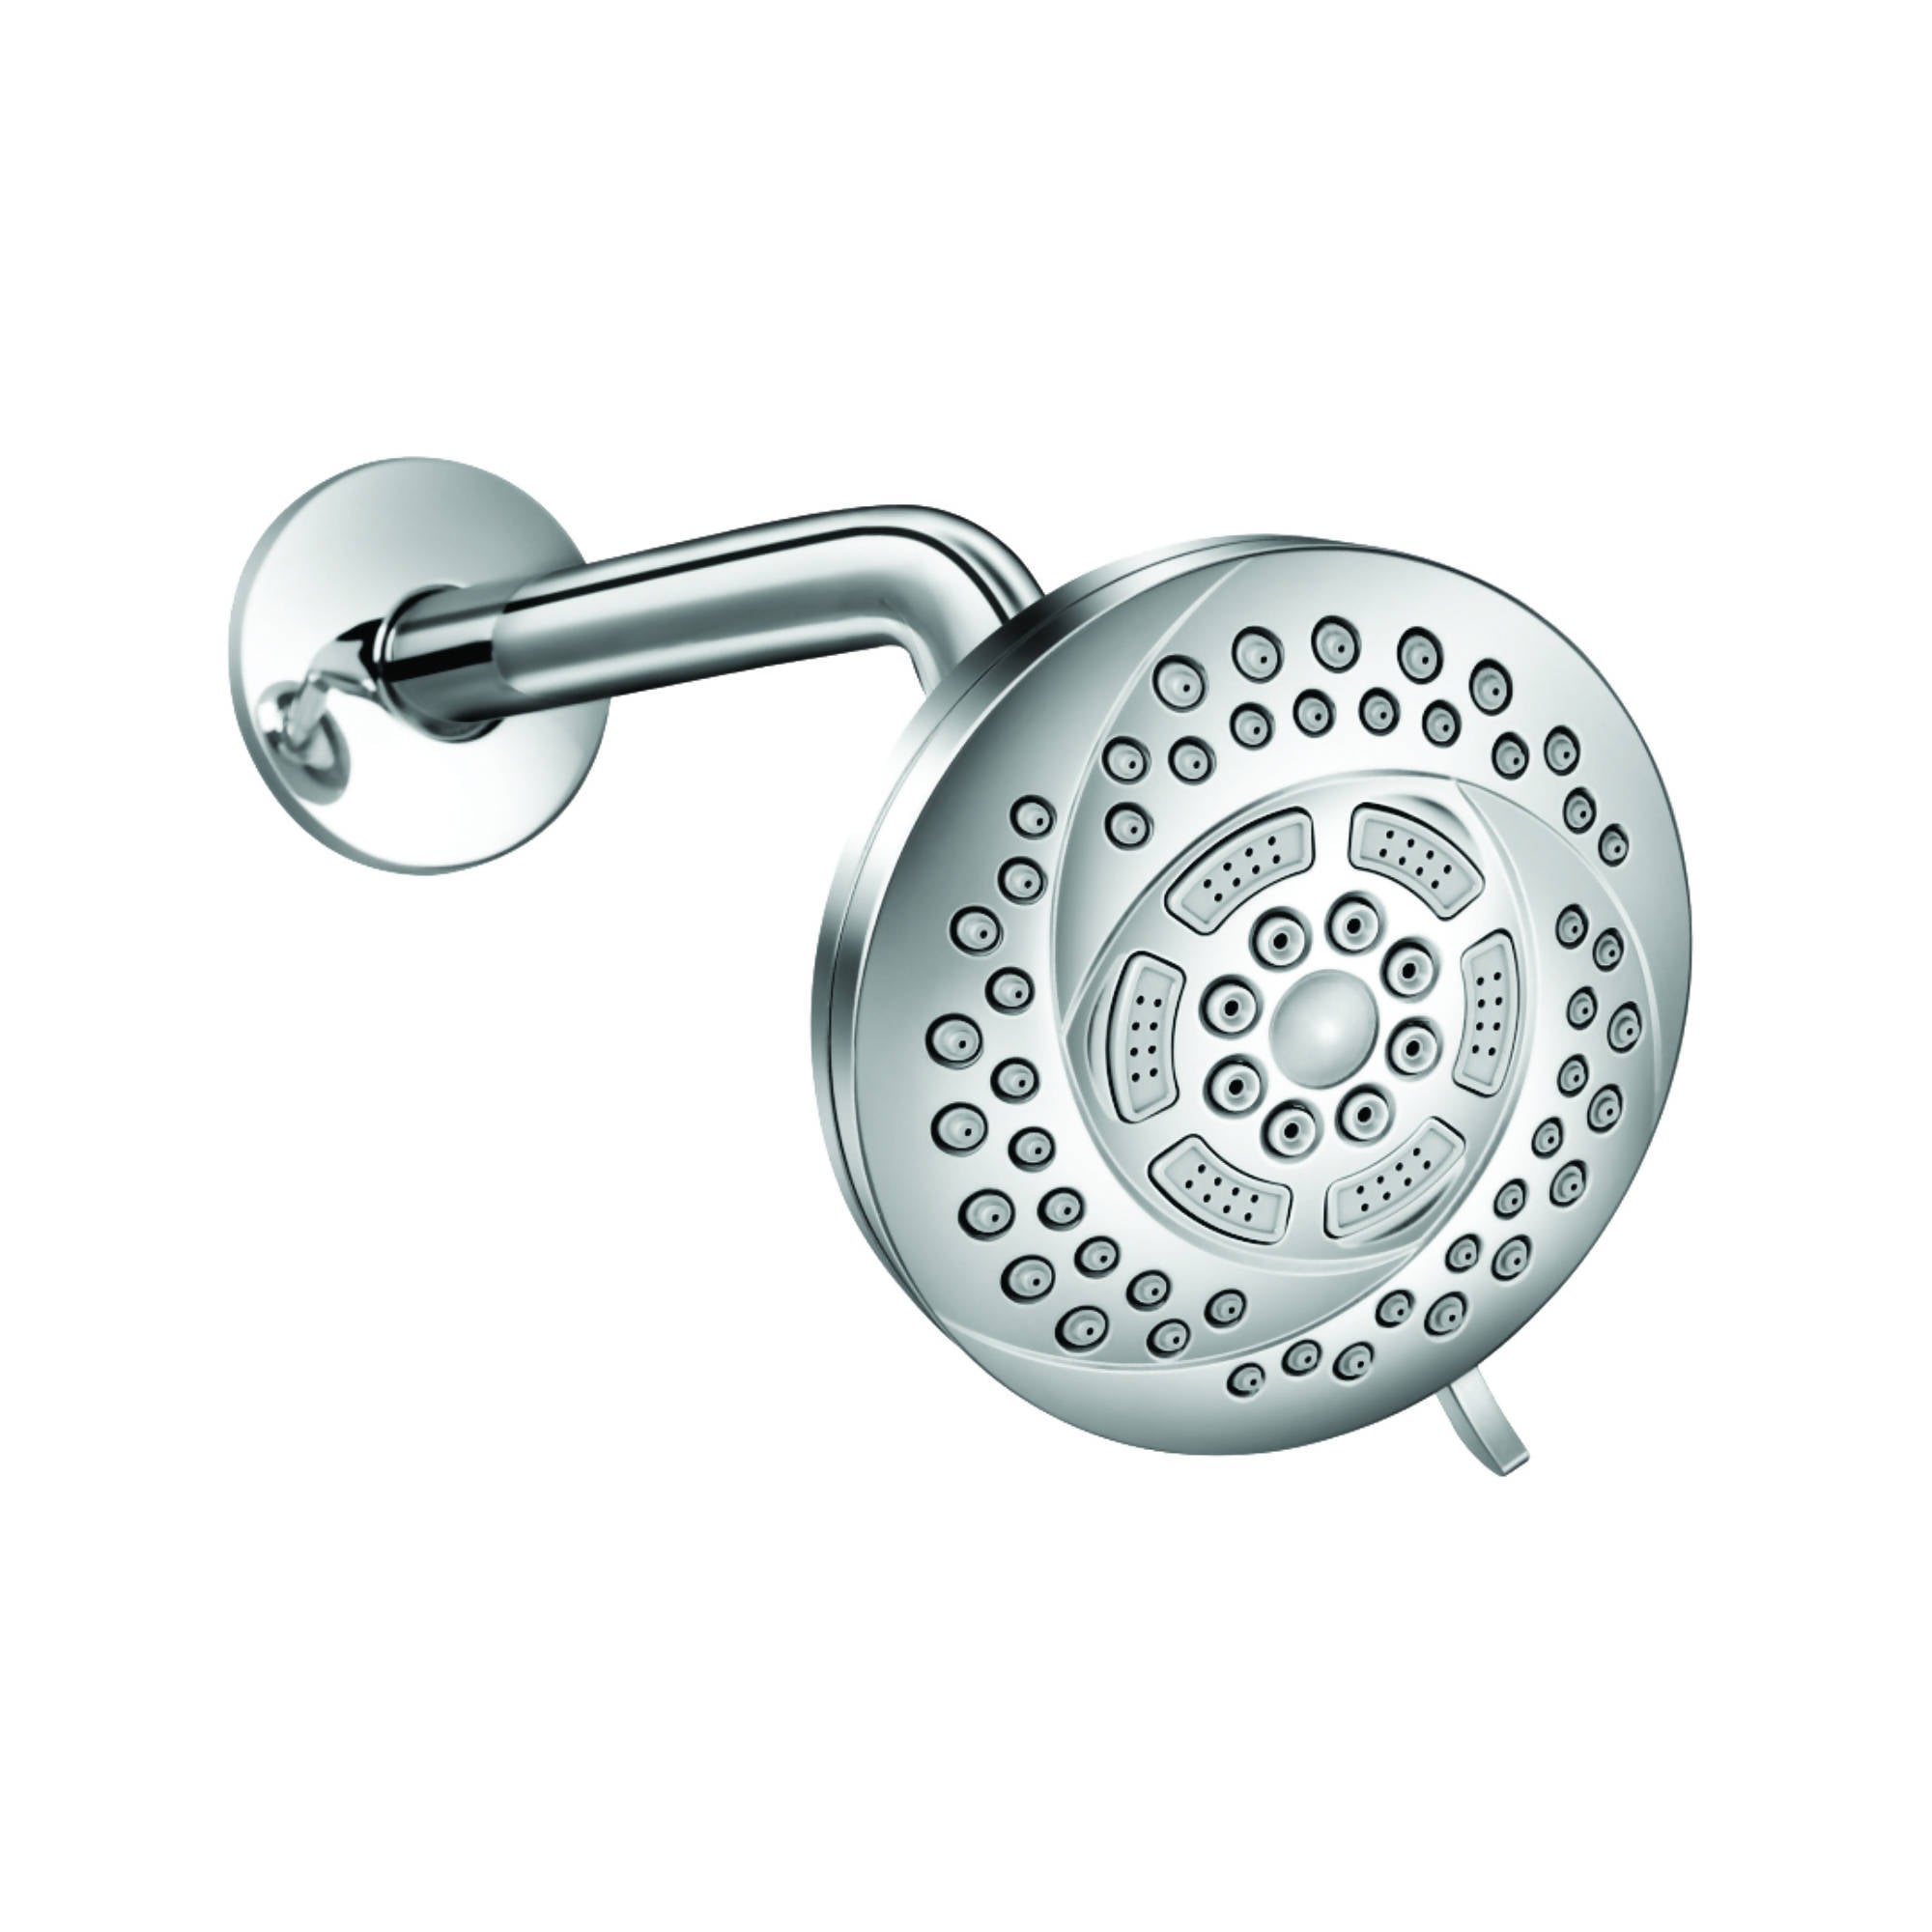 Somany Beau 6 Fn 5 inch OH Shower with Arm & Flange Somany Ceramics